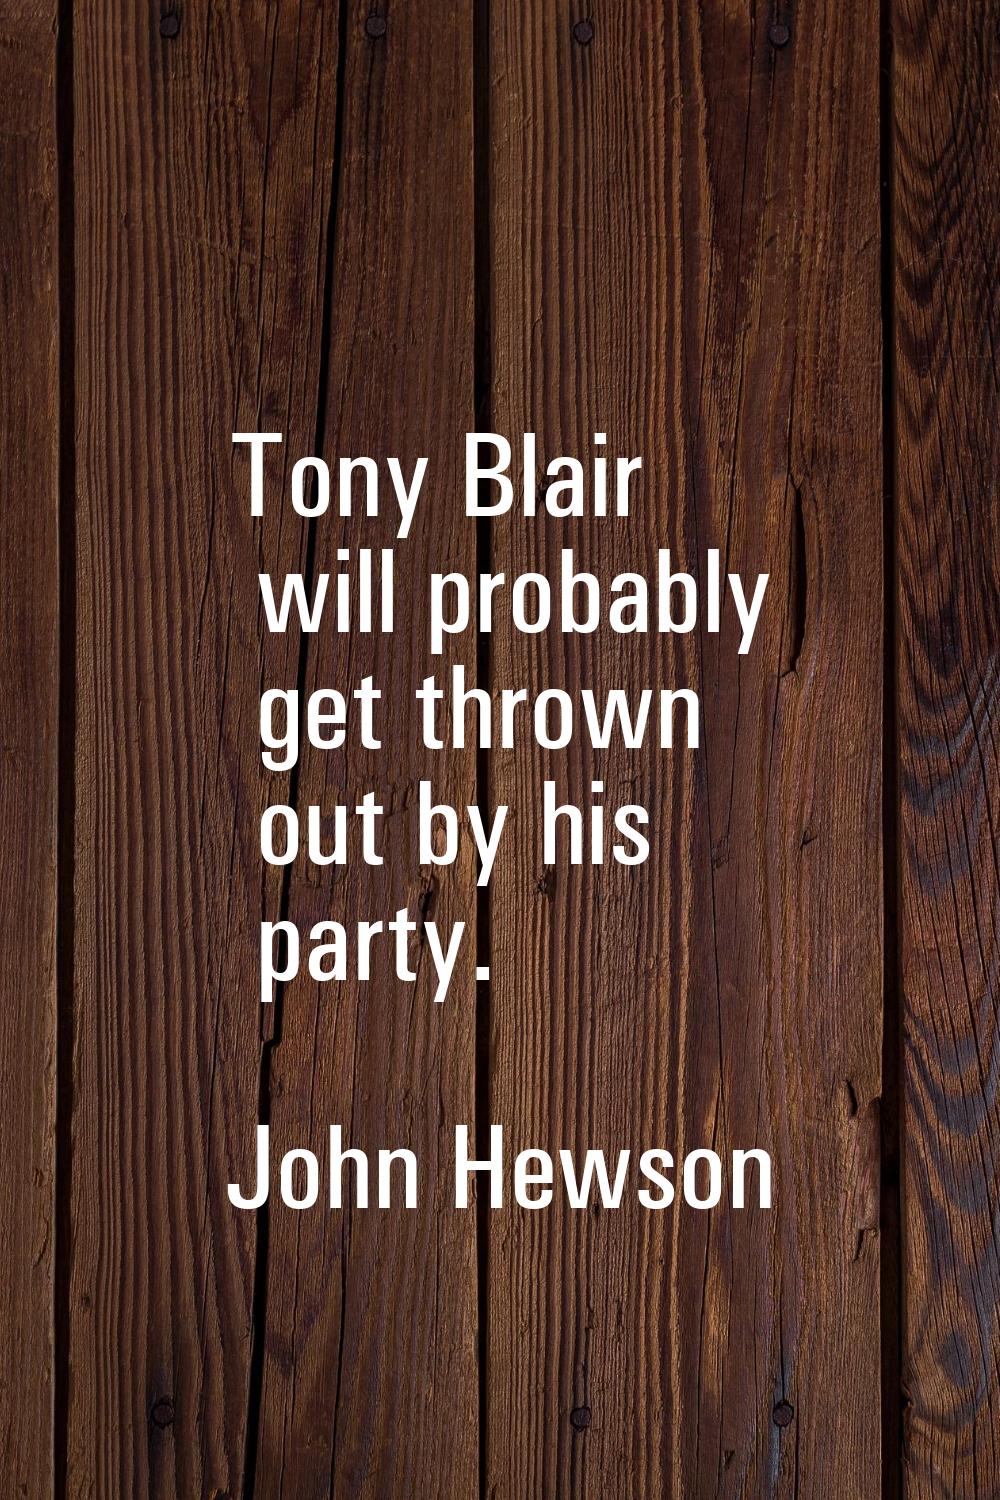 Tony Blair will probably get thrown out by his party.